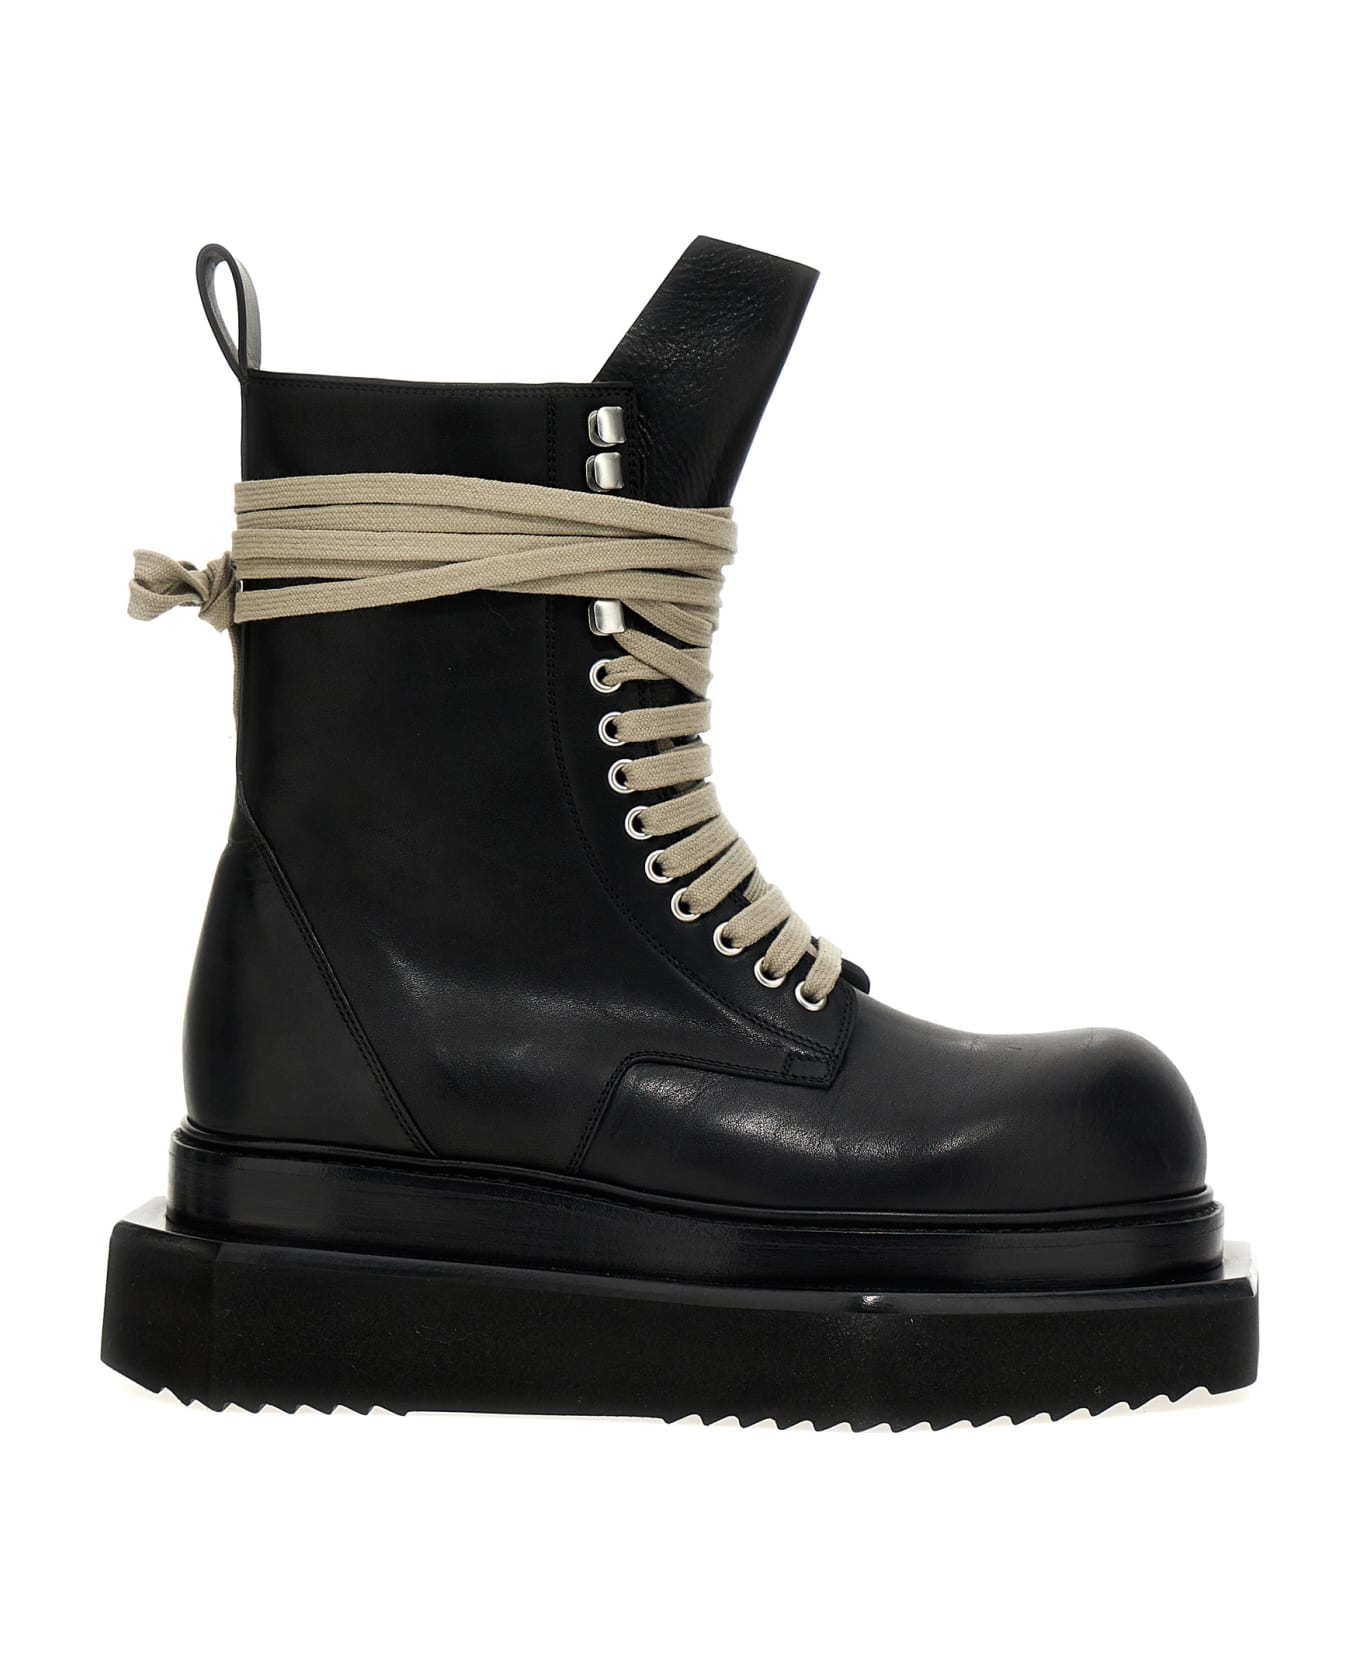 Rick Owens 'laceup Turbo Cyclops' Boots - Black  